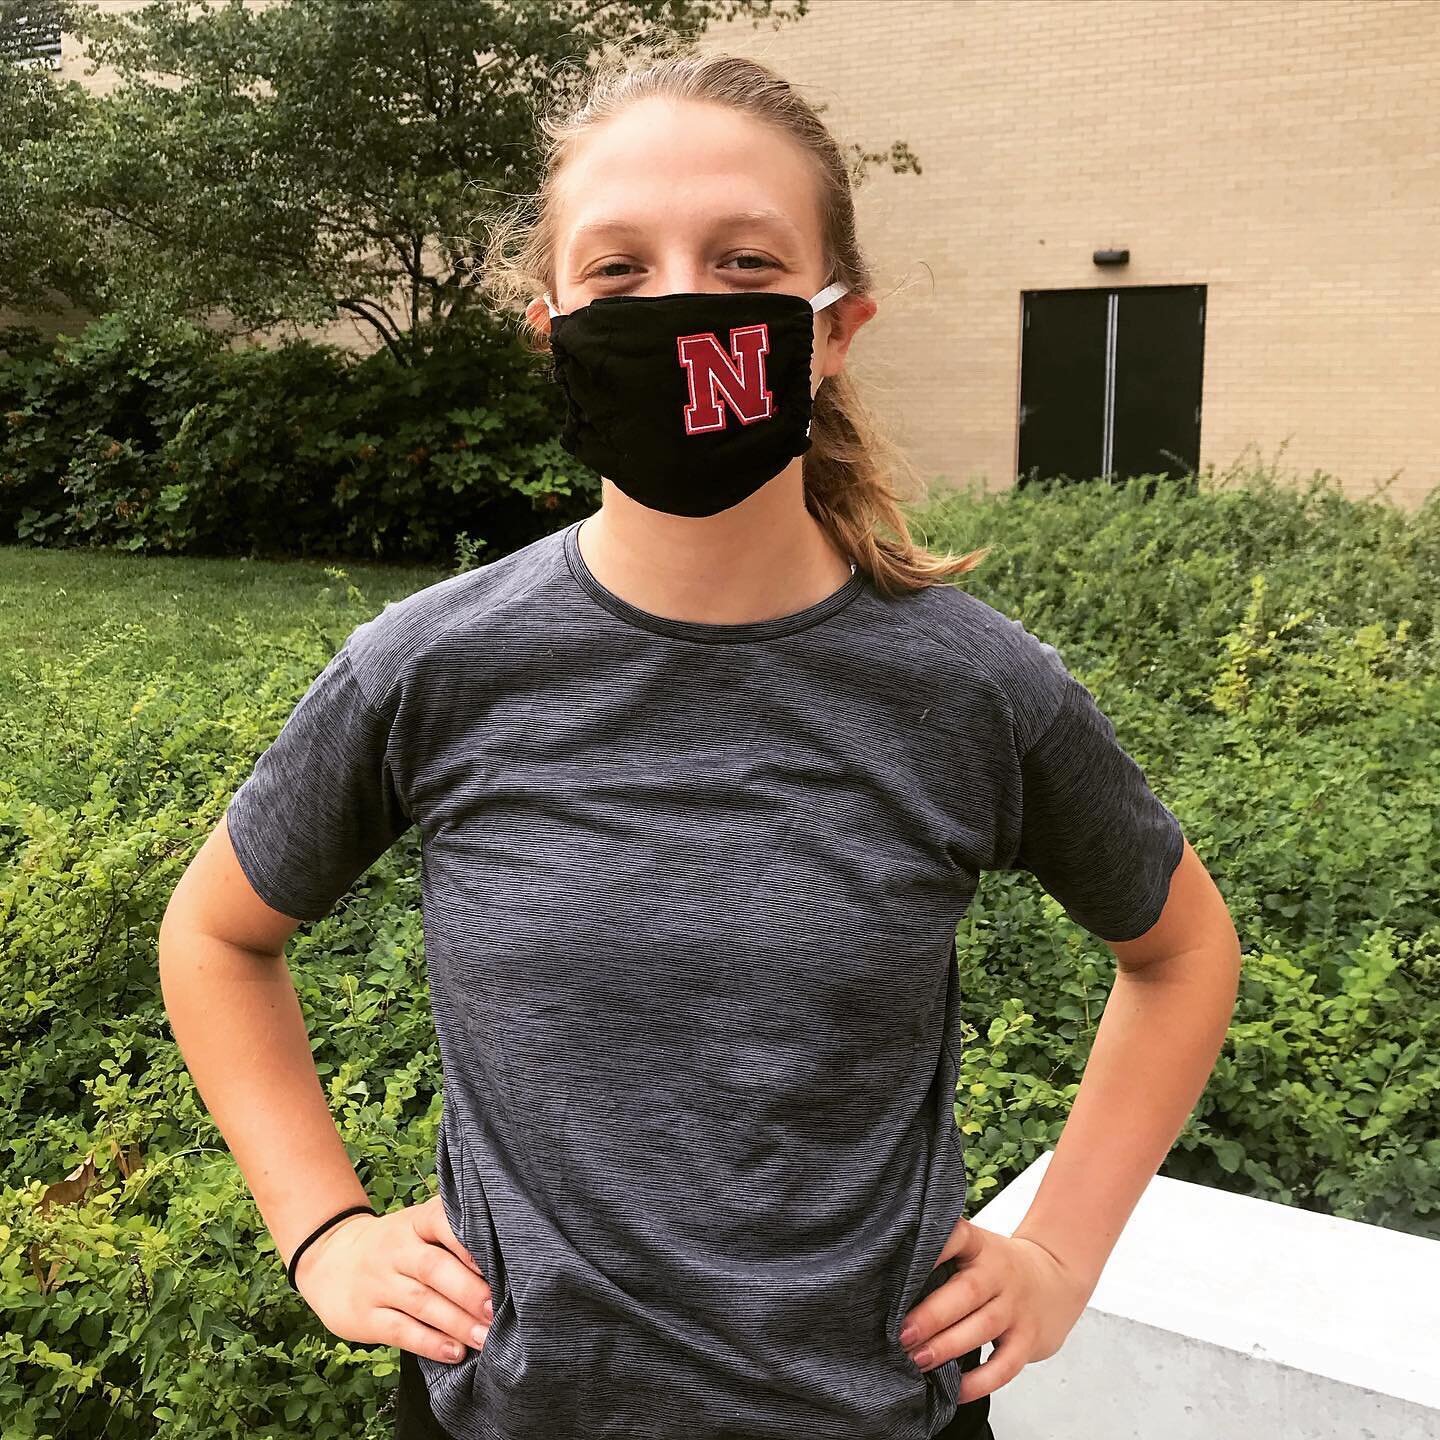 Are you ready for school to start?! You too can wear these cool Husker masks...just be sure to wash with soap and hot water after every use! UNL students can pick up their 2 cloth masks at the Nebraska Union, Campus Recreation Center or East Campus R